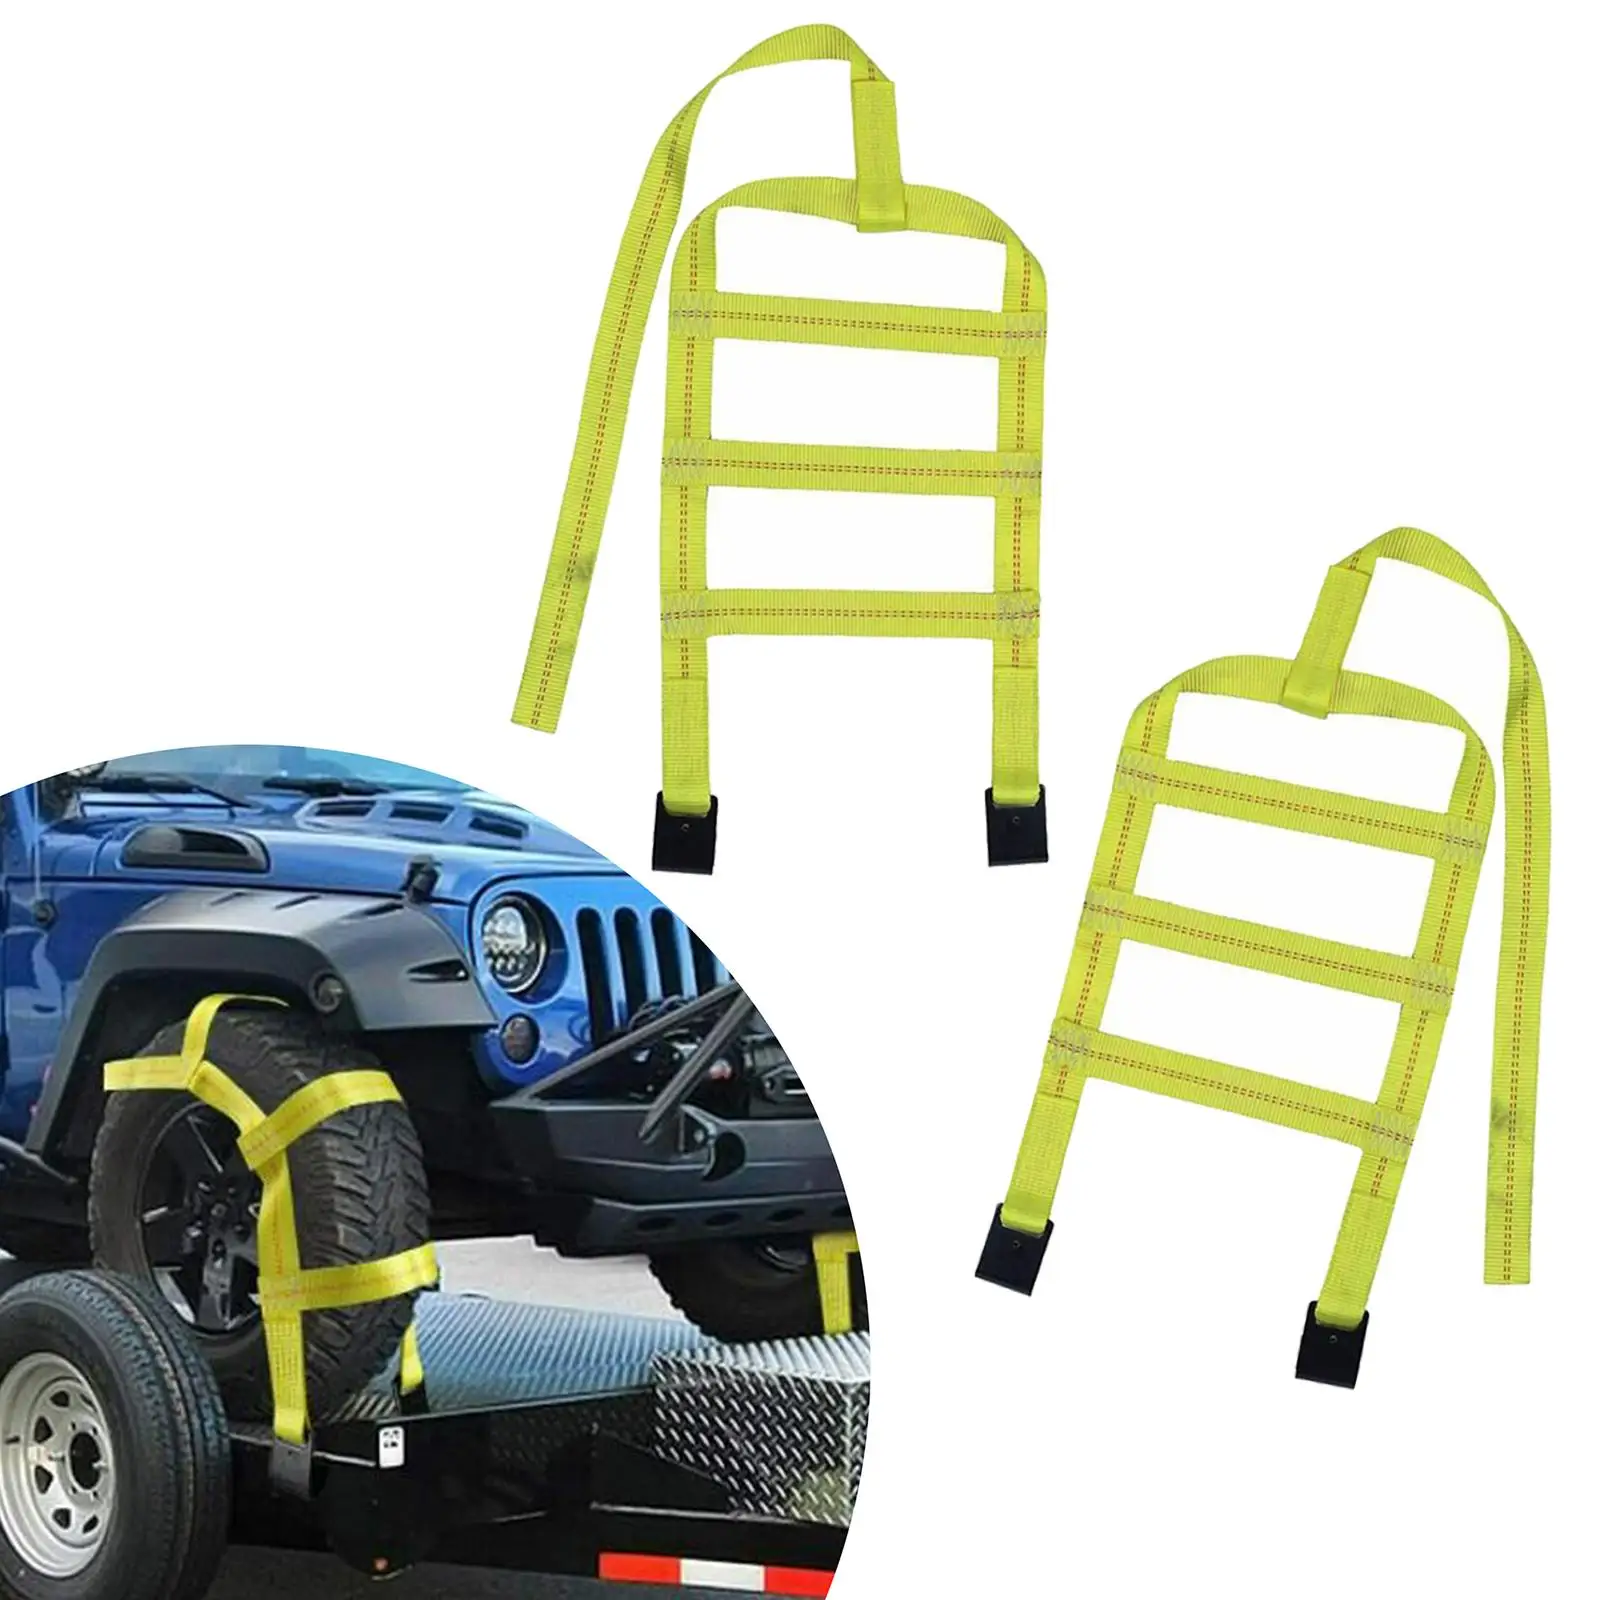 Tow Straps Universal Adjustable Wheel Net Set for 14-17inch Tires